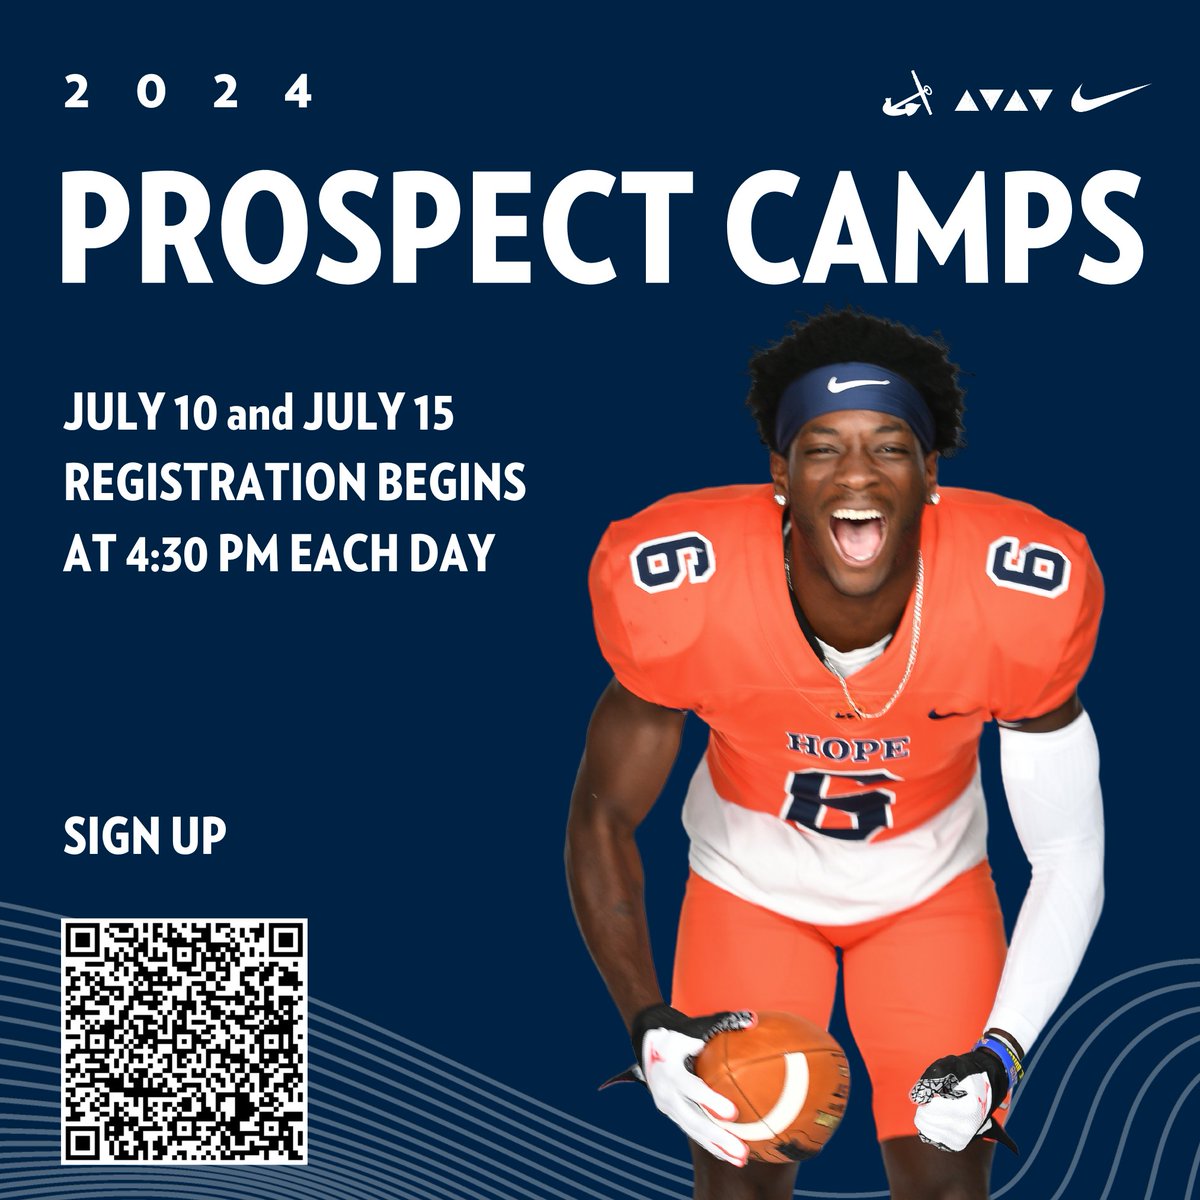 We're fired up to see you at our prospect camps this summer. Sign up for one today: hopecollegeeco.regfox.com/hope-football-…